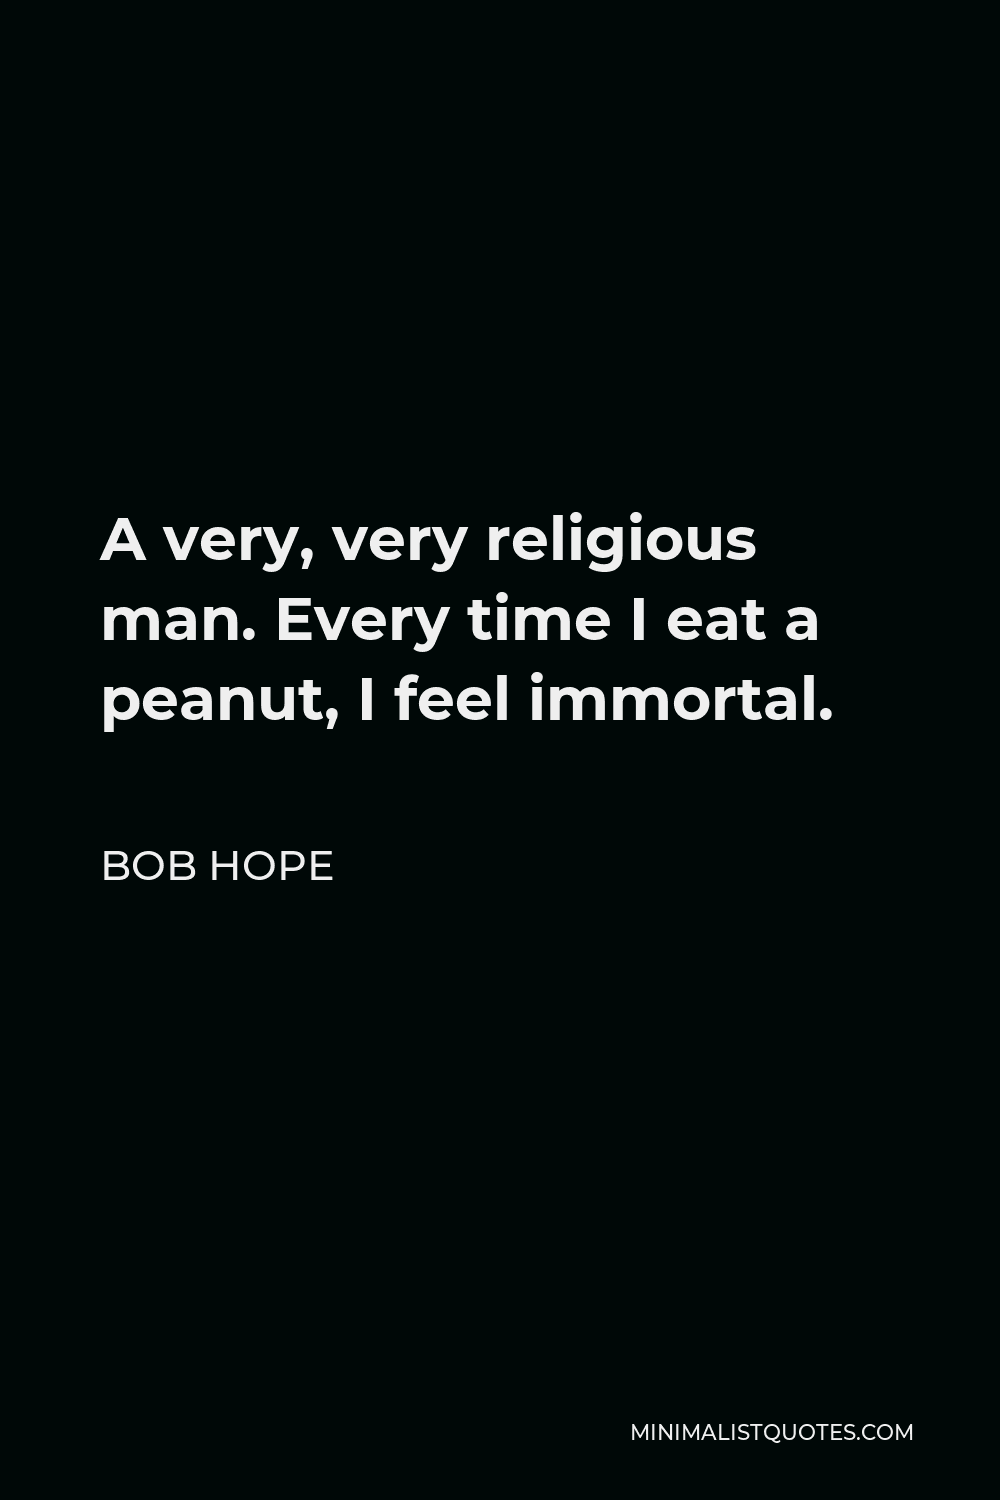 Bob Hope Quote - A very, very religious man. Every time I eat a peanut, I feel immortal.